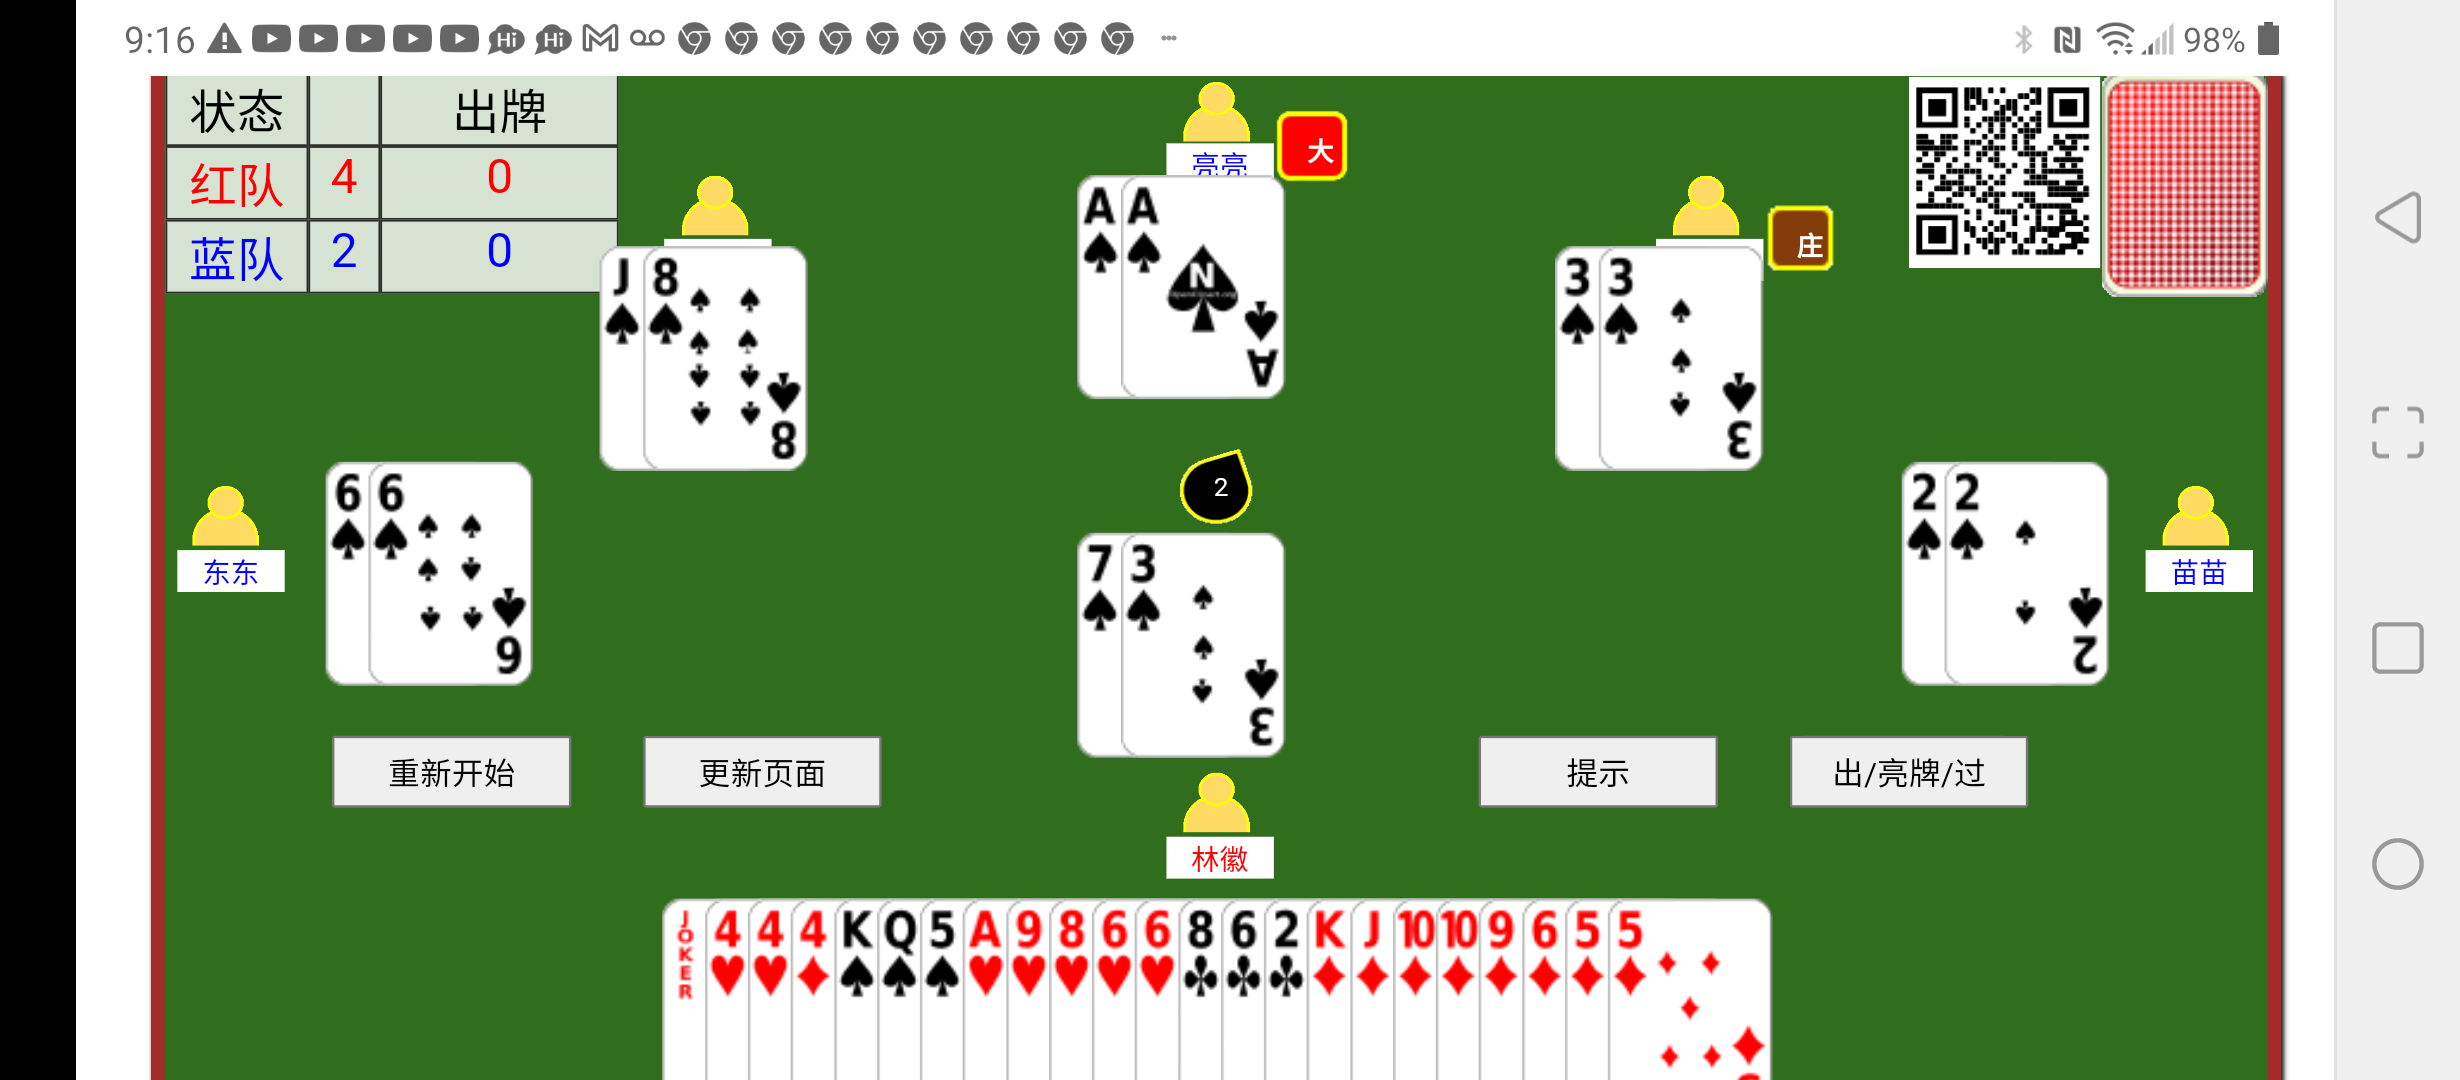 html5 tractor card game Screenshot_20220116-091608.png